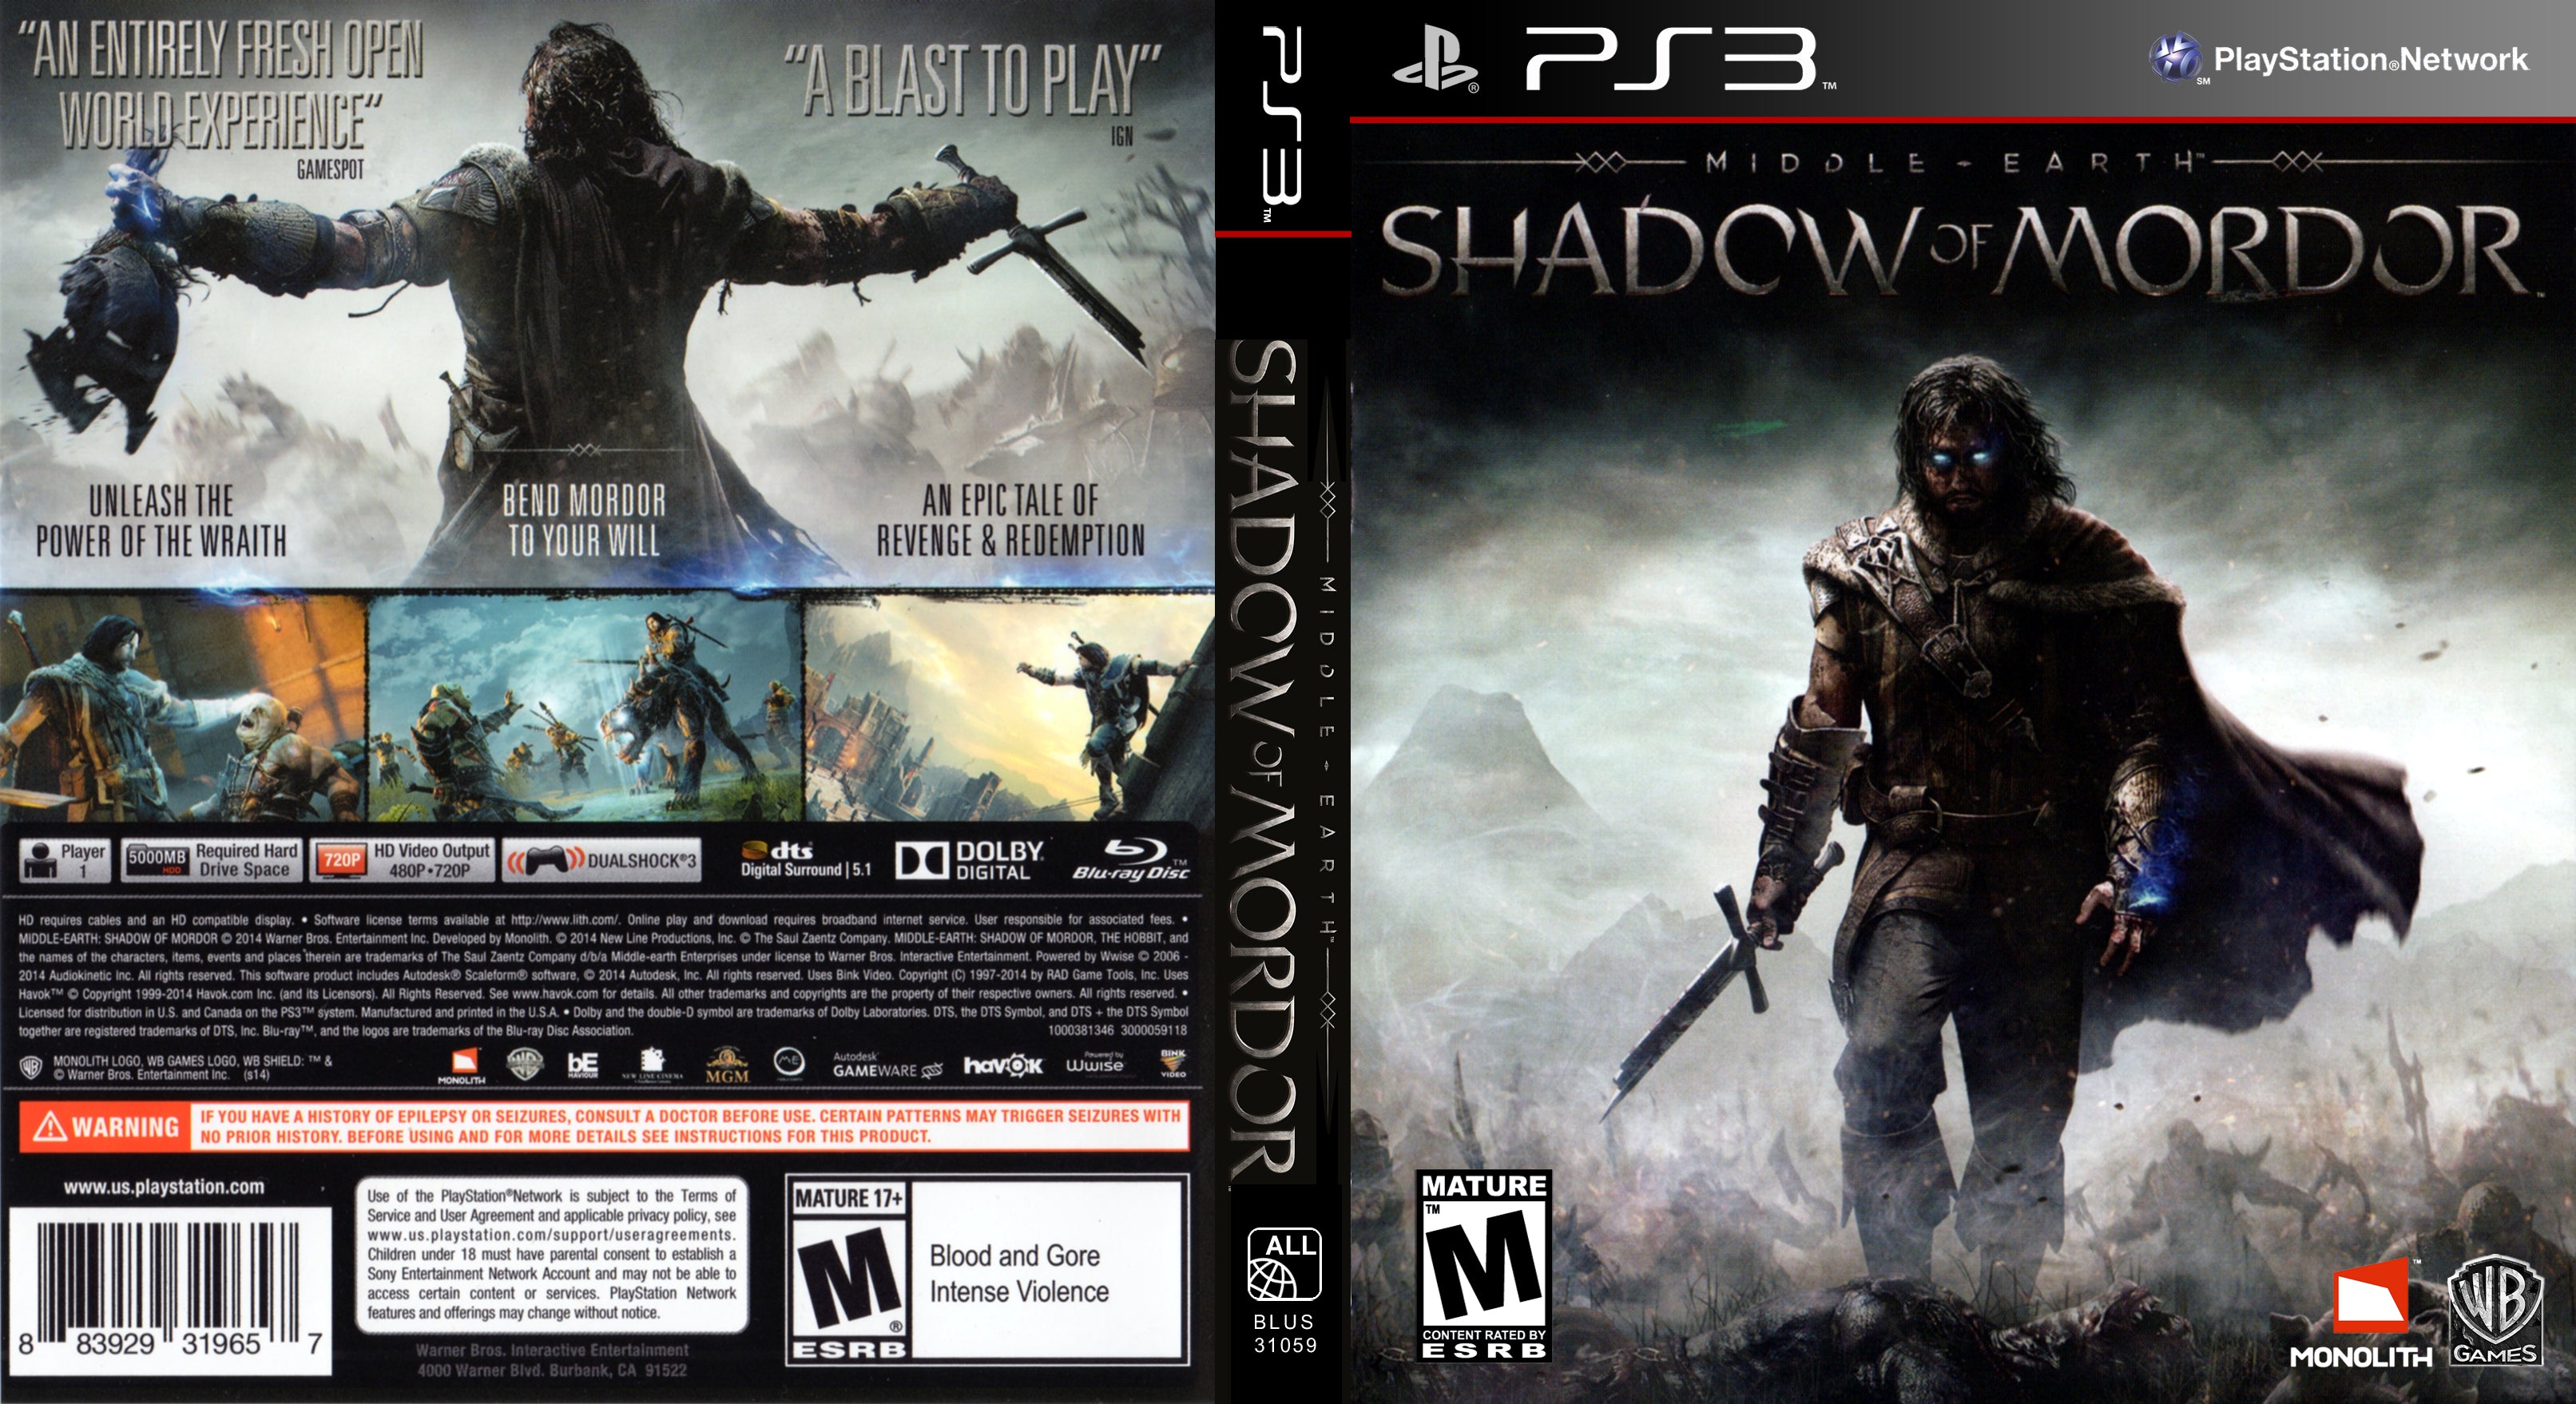 Ps3 - Middle Earth Shadow of Mordor Sony PlayStation 3 Complete #111